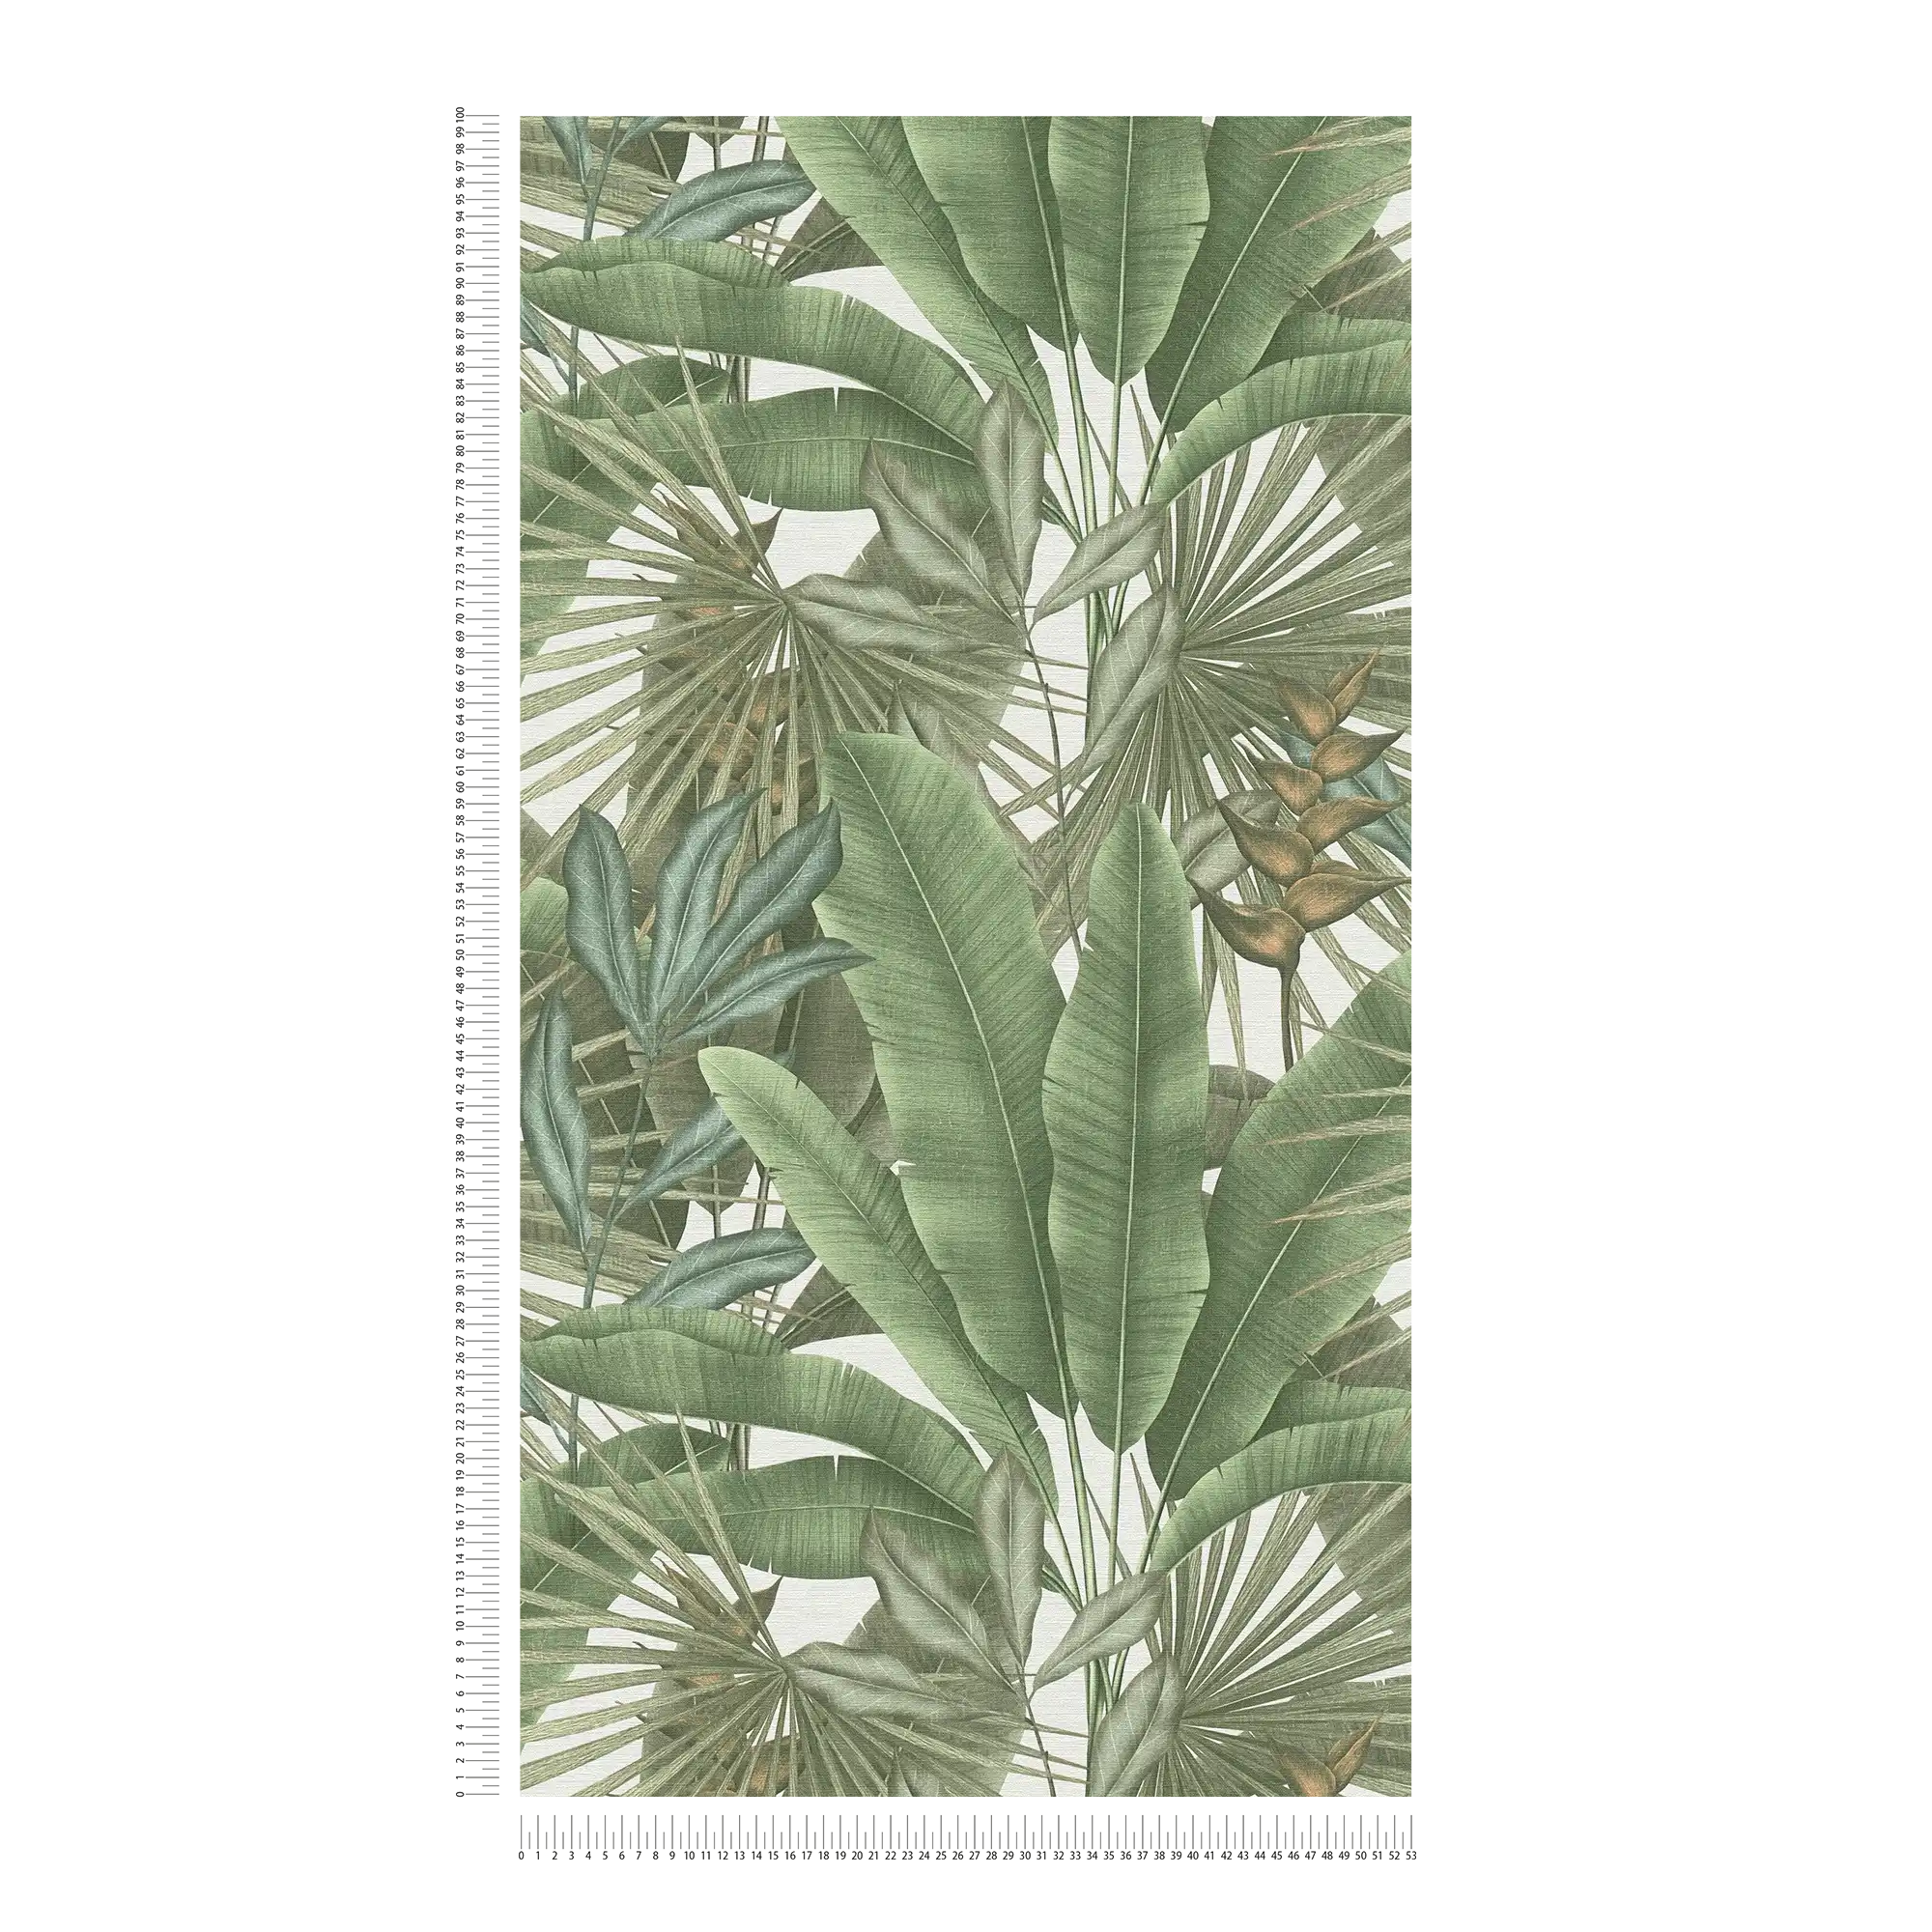             Lightly textured floral jungle wallpaper with large leaves - green, white, beige
        